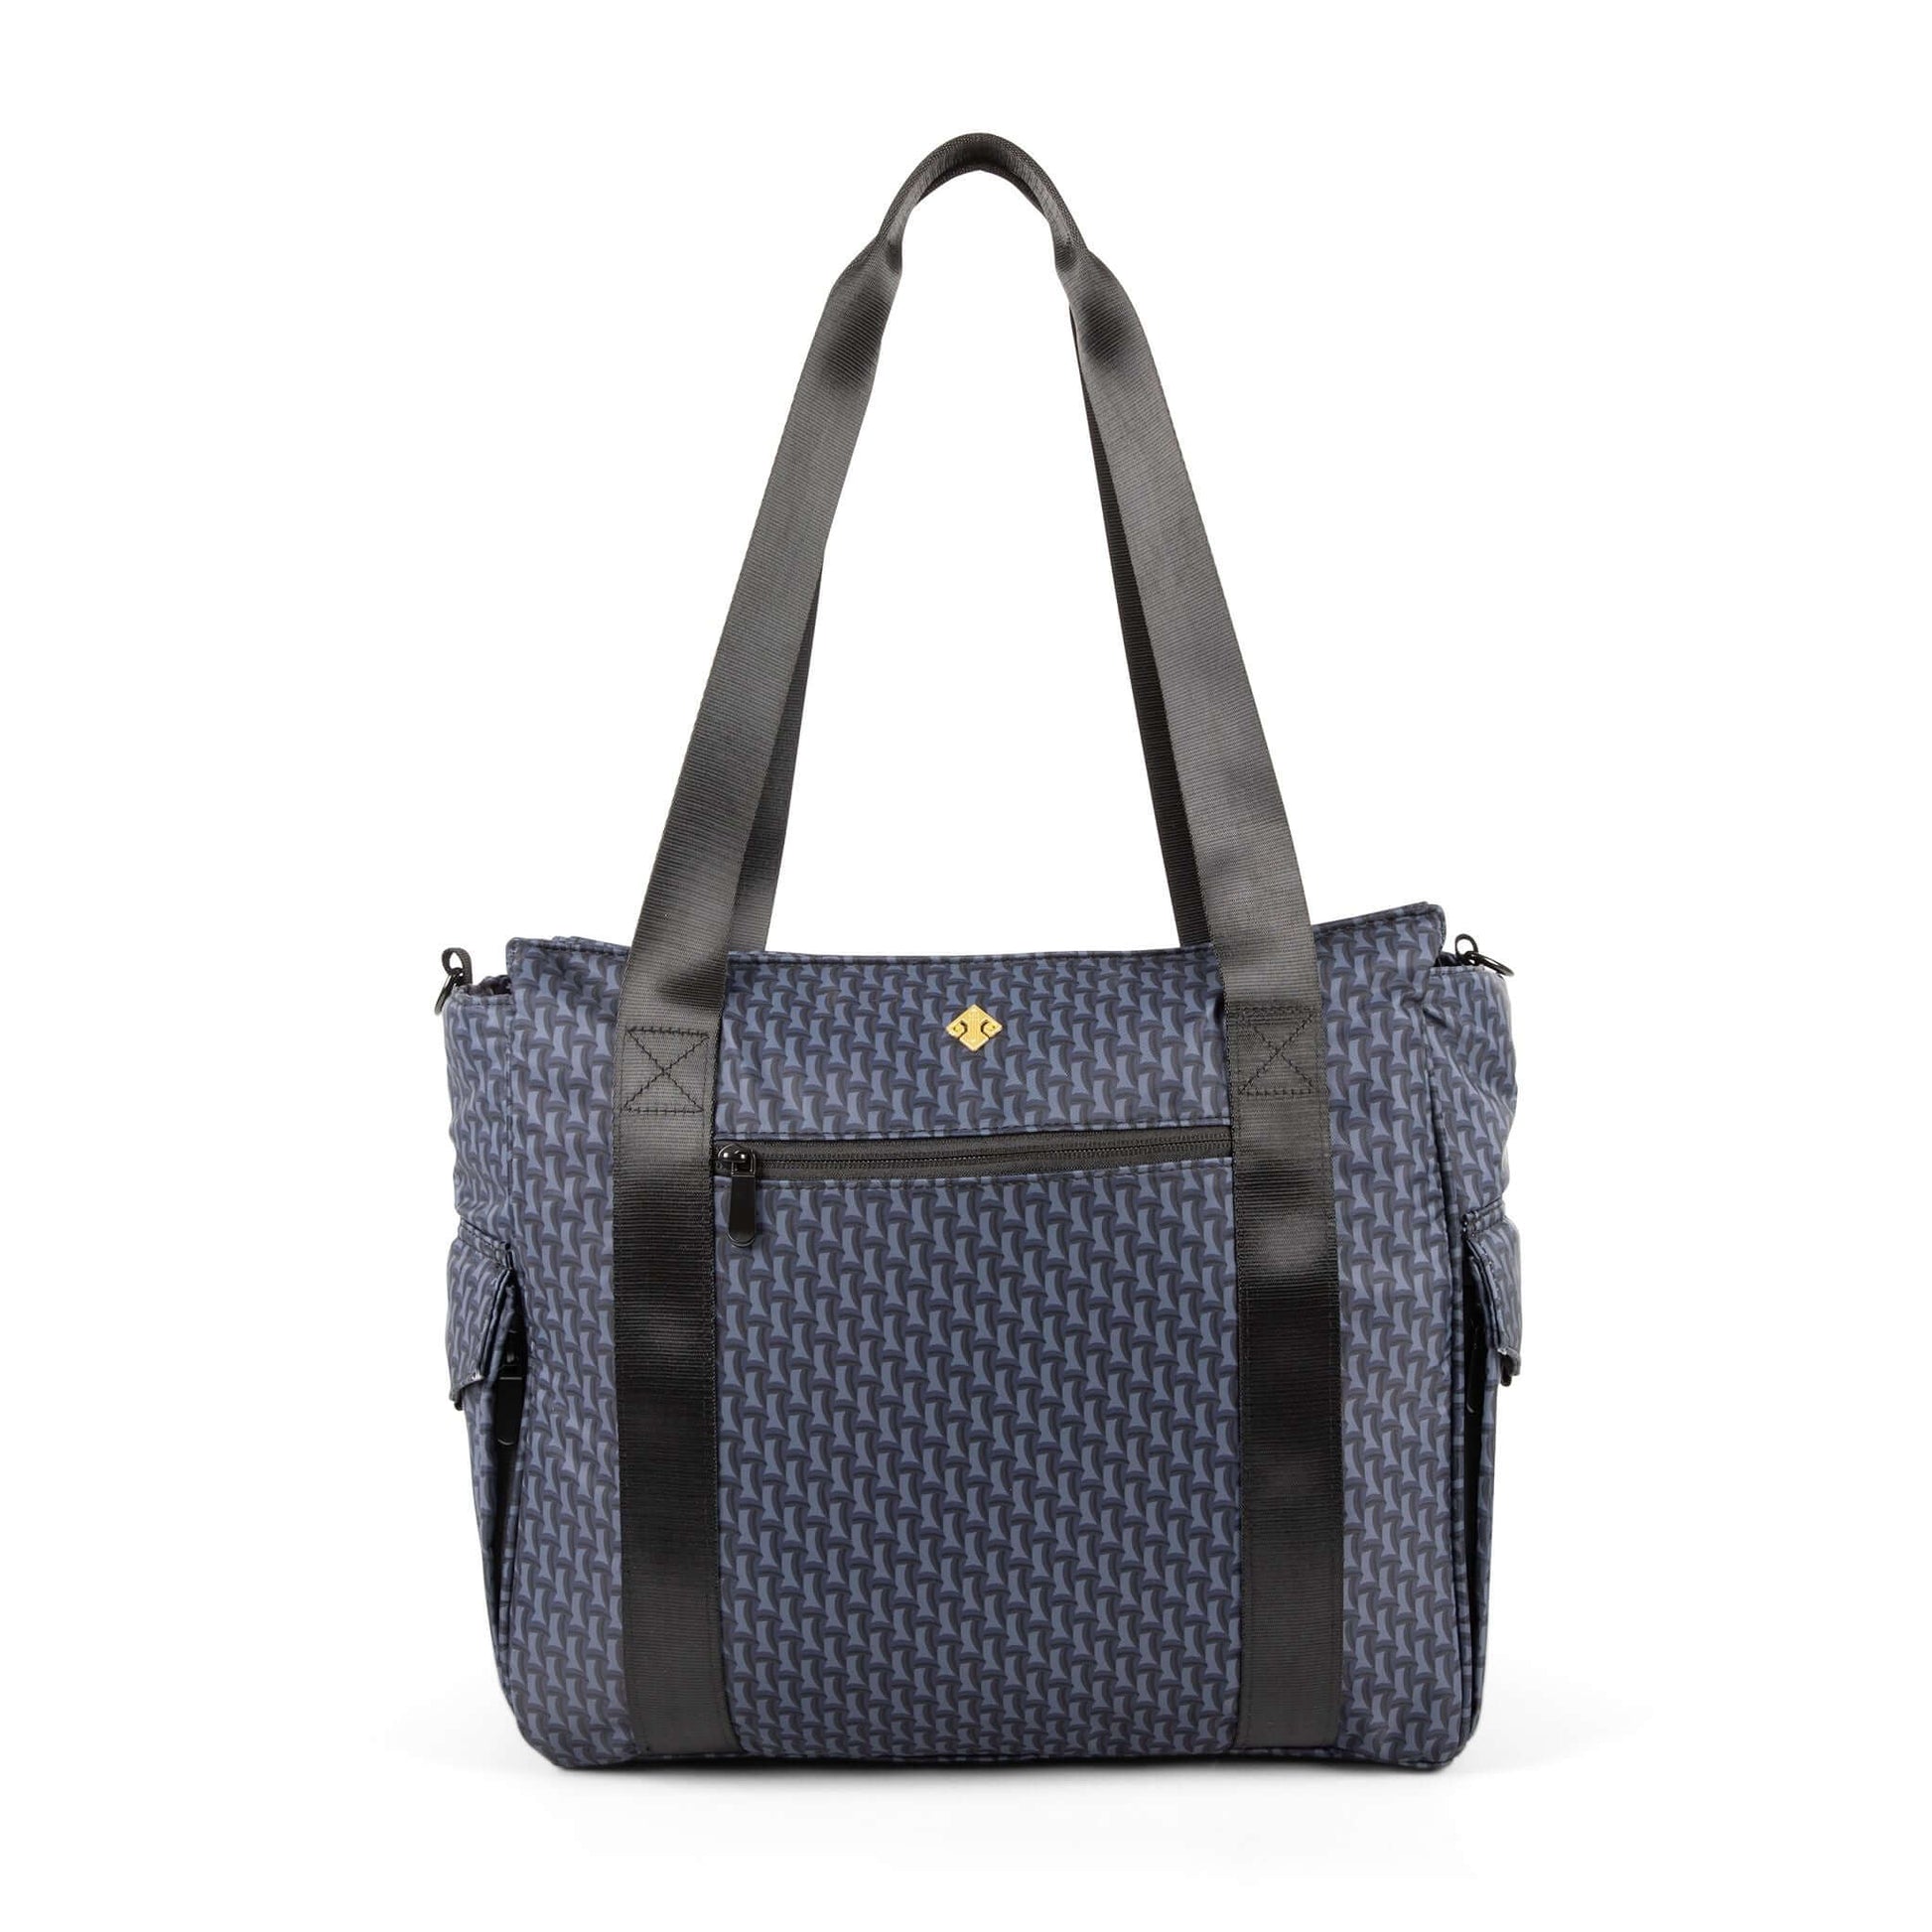 front view of the ellerby tote bag showing the front pockers for your additional things